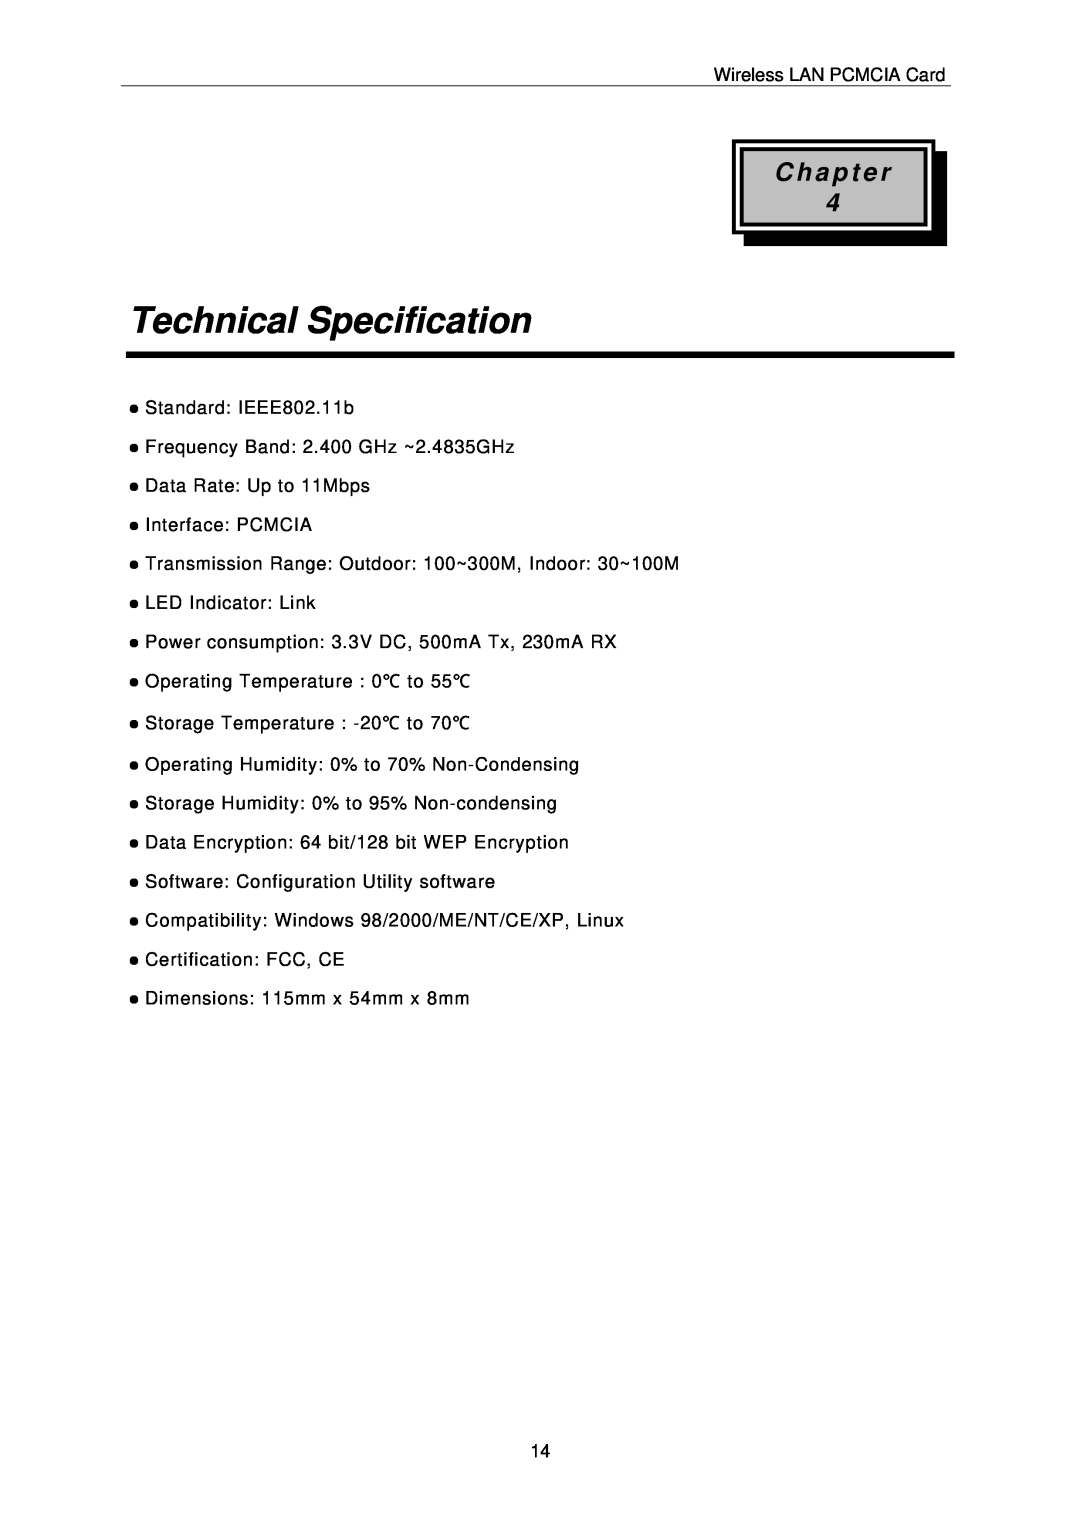 IBM PCMCIA Card user manual Technical Specification, C h a p t e r 